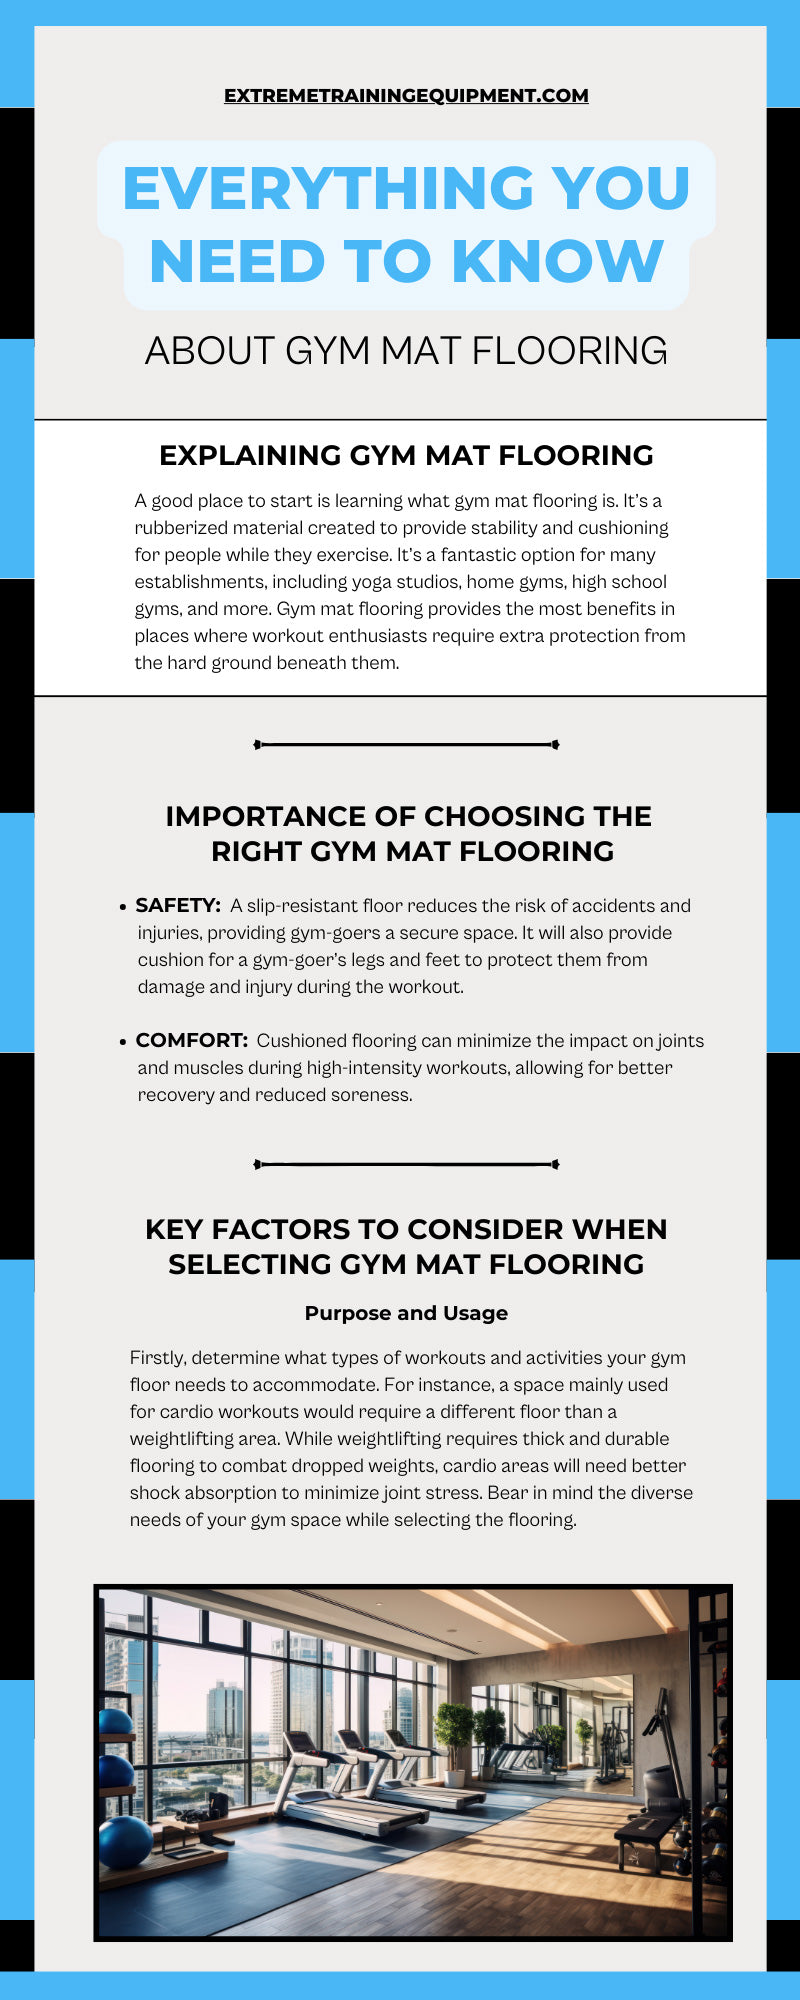 Everything You Need To Know About Gym Mat Flooring